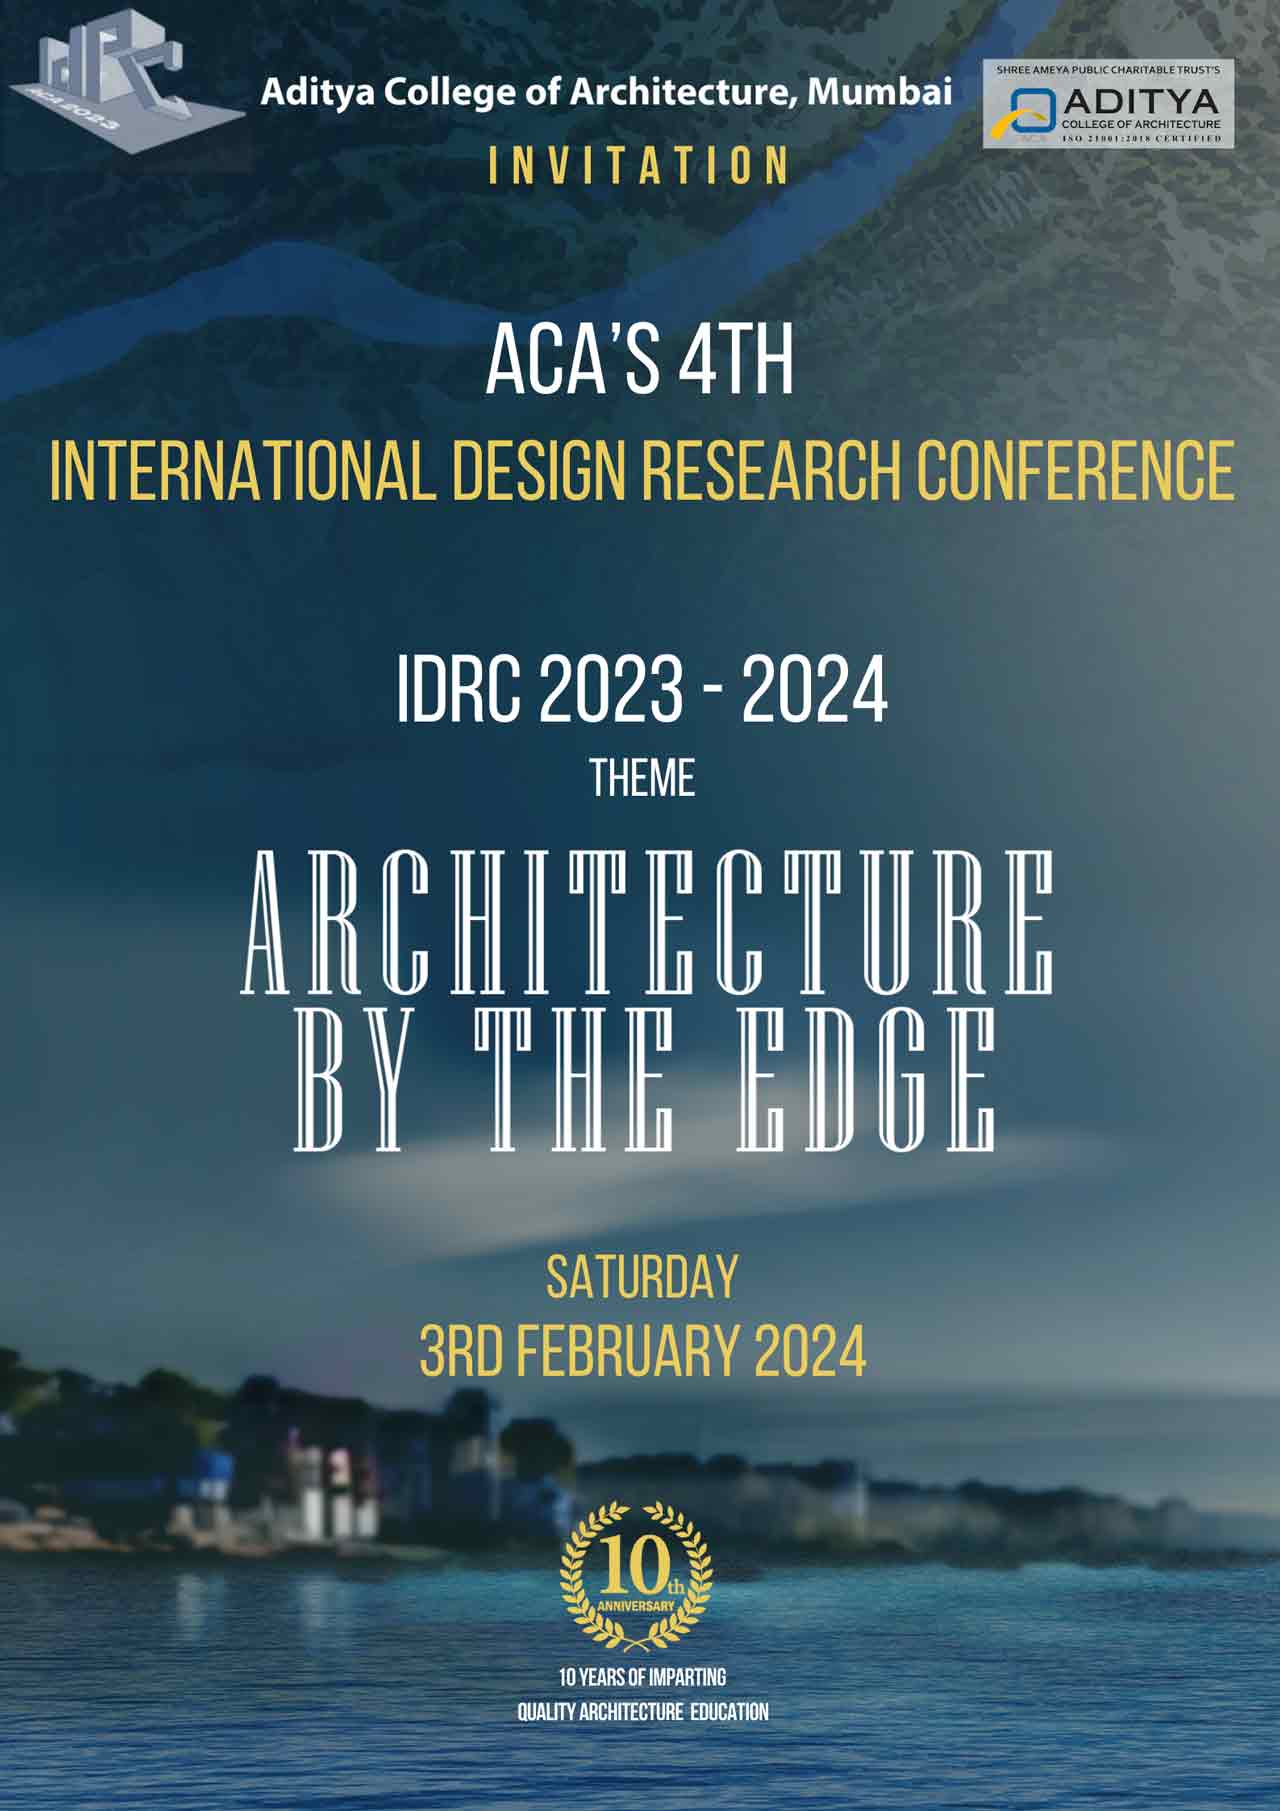 WELCOME TO ACA's 4th INTERNATIONAL DESIGN RESEARCH CONFERENCE